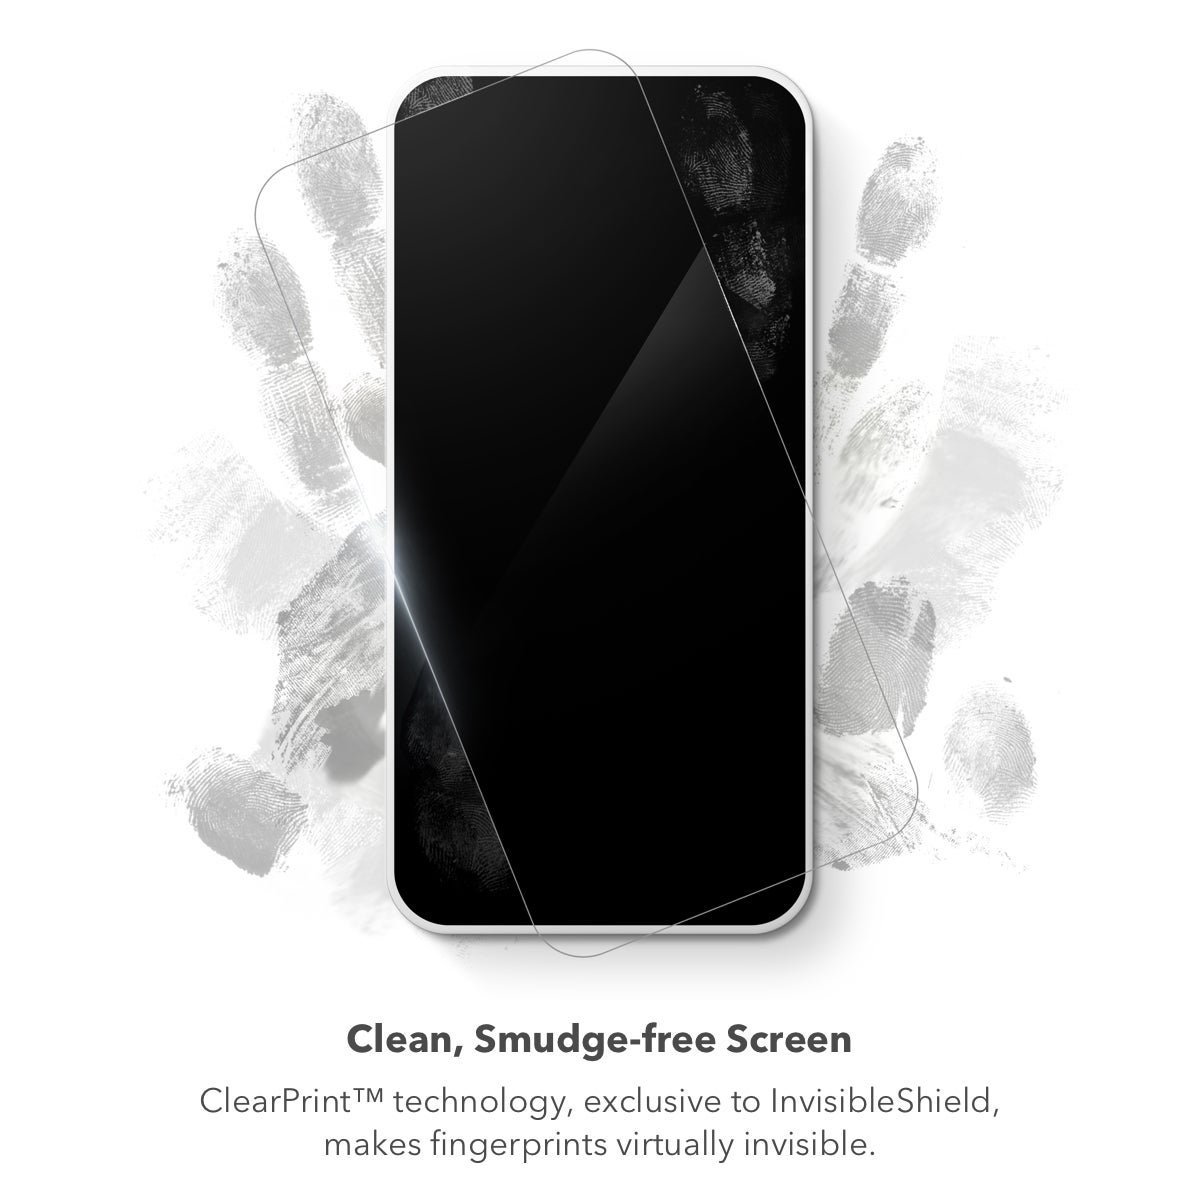 Clean, Smudge-free Screen
|| ClearPrint™, a revolutionary surface treatment exclusive to InvisibleShield, disperses the oil from your fingertips, making them nearly invisible when your screen is turned on